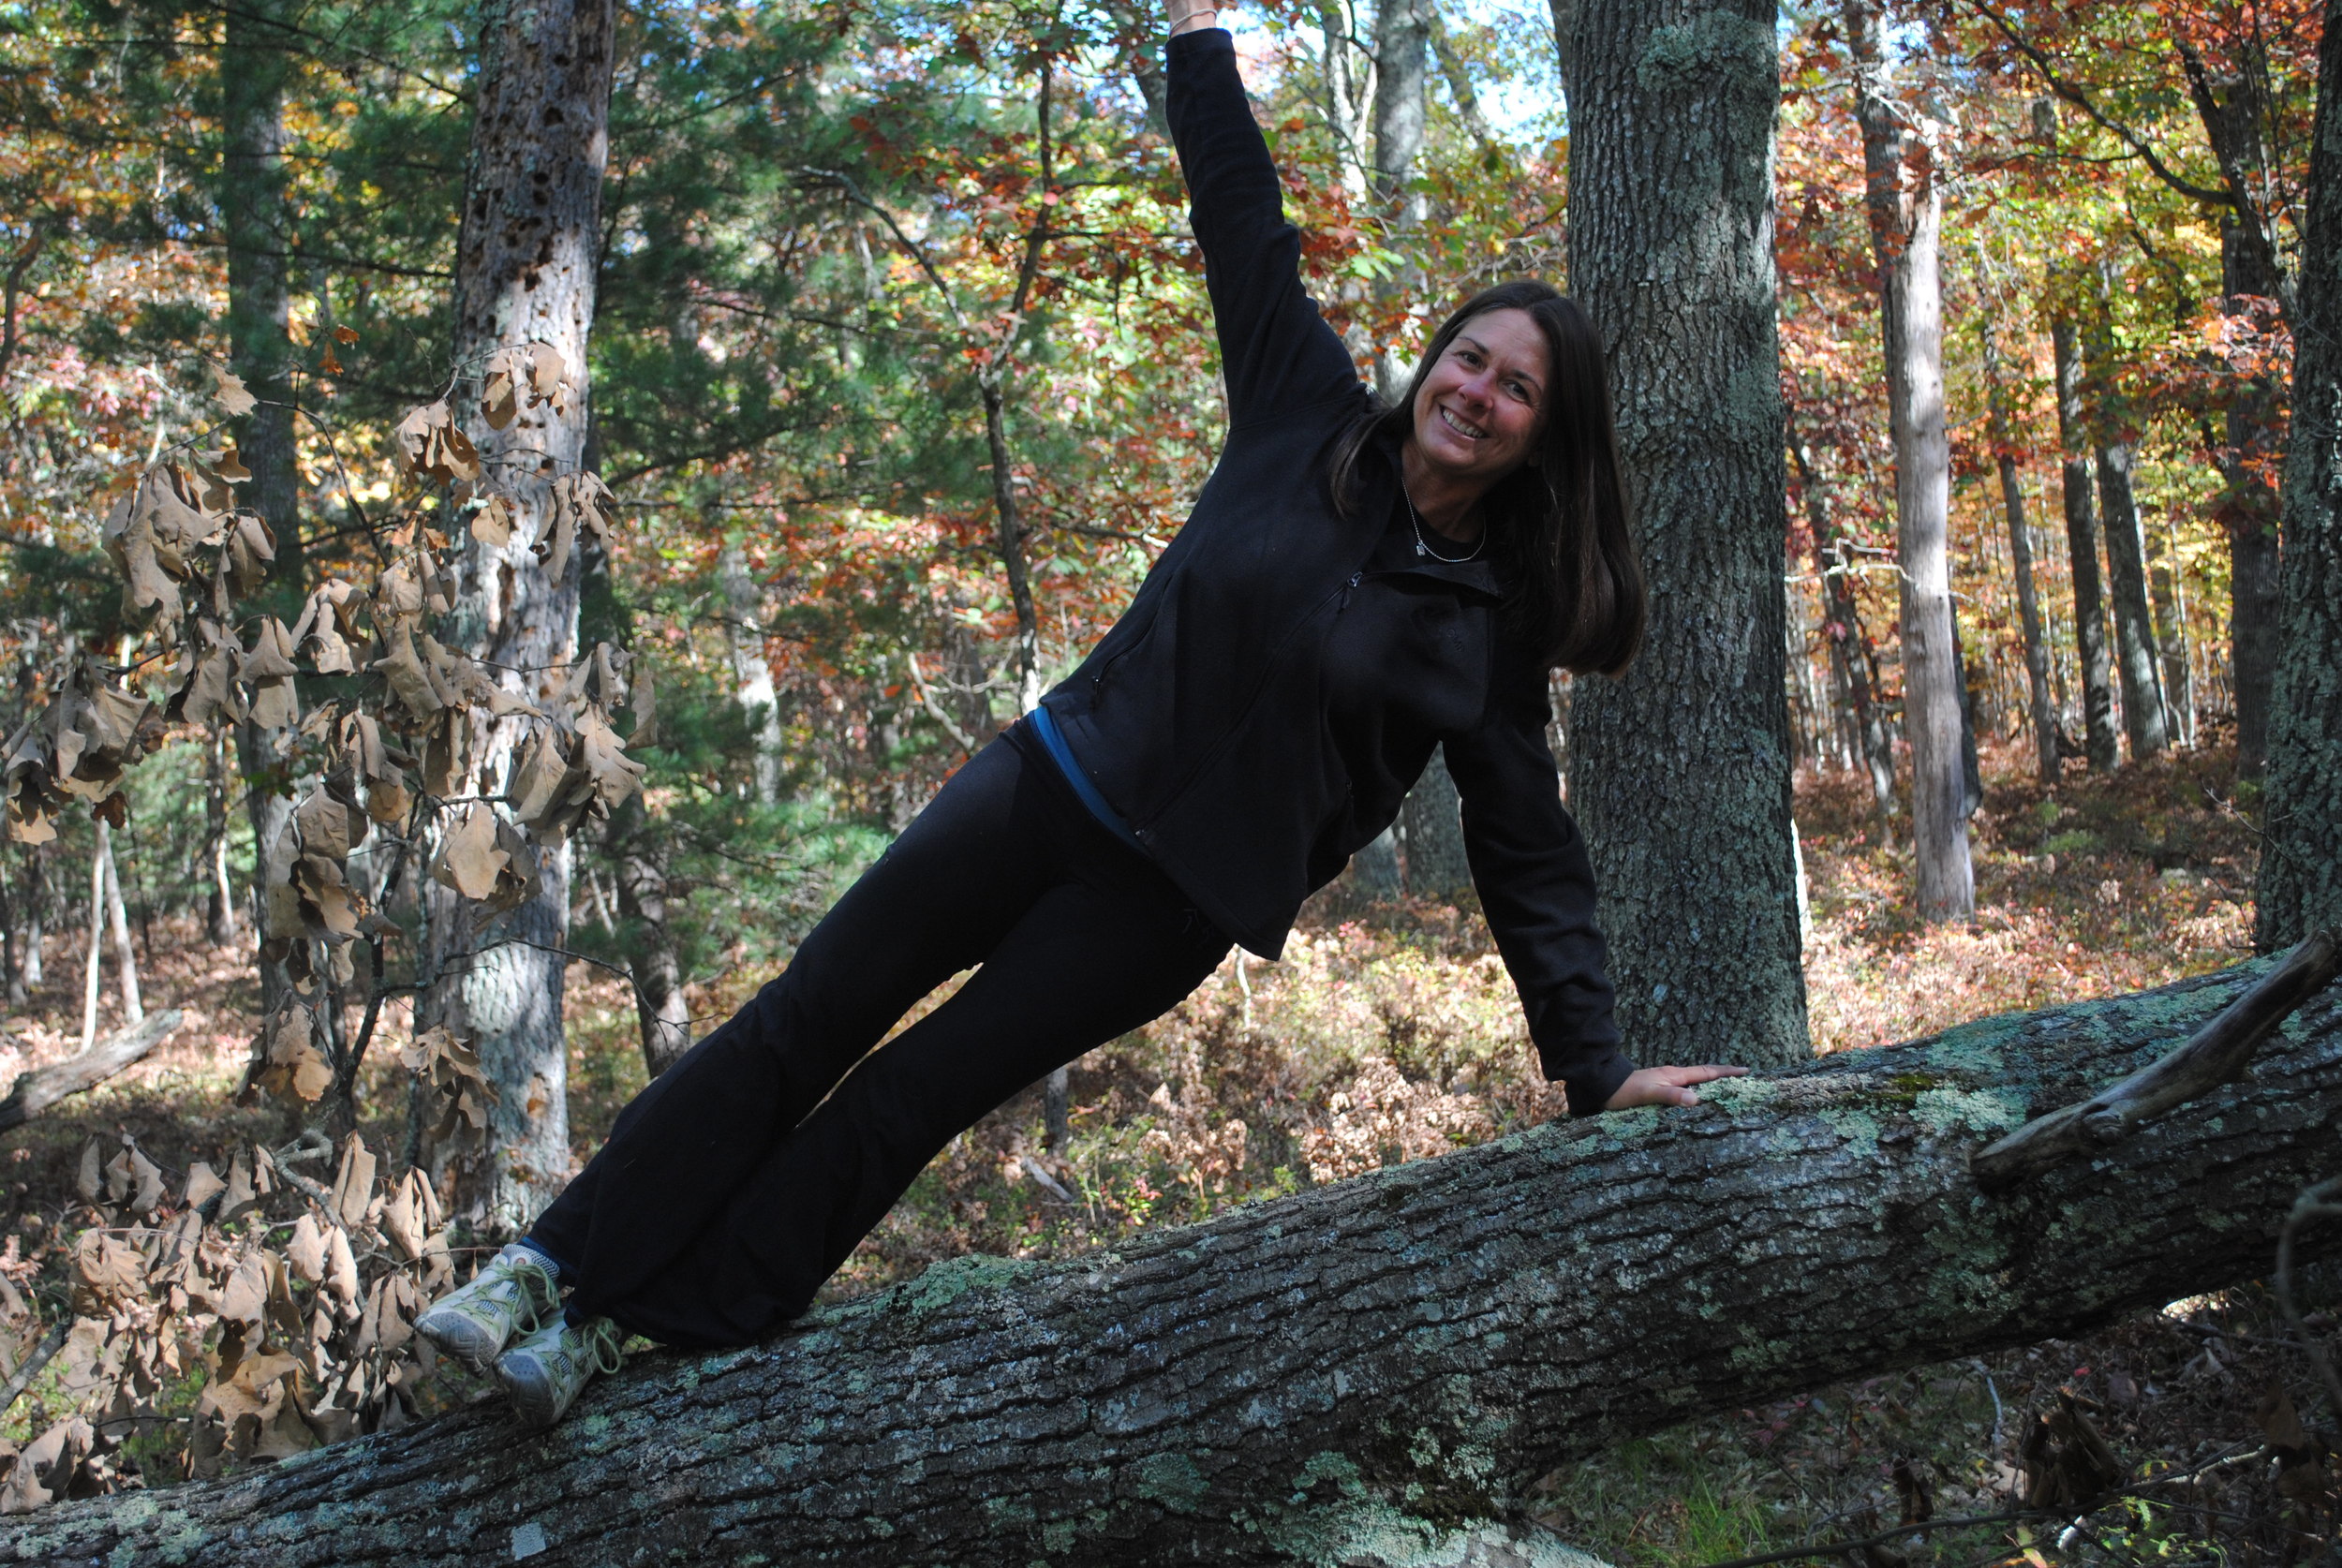 Side planking on a fallen tree. (Super challenging for your balance).